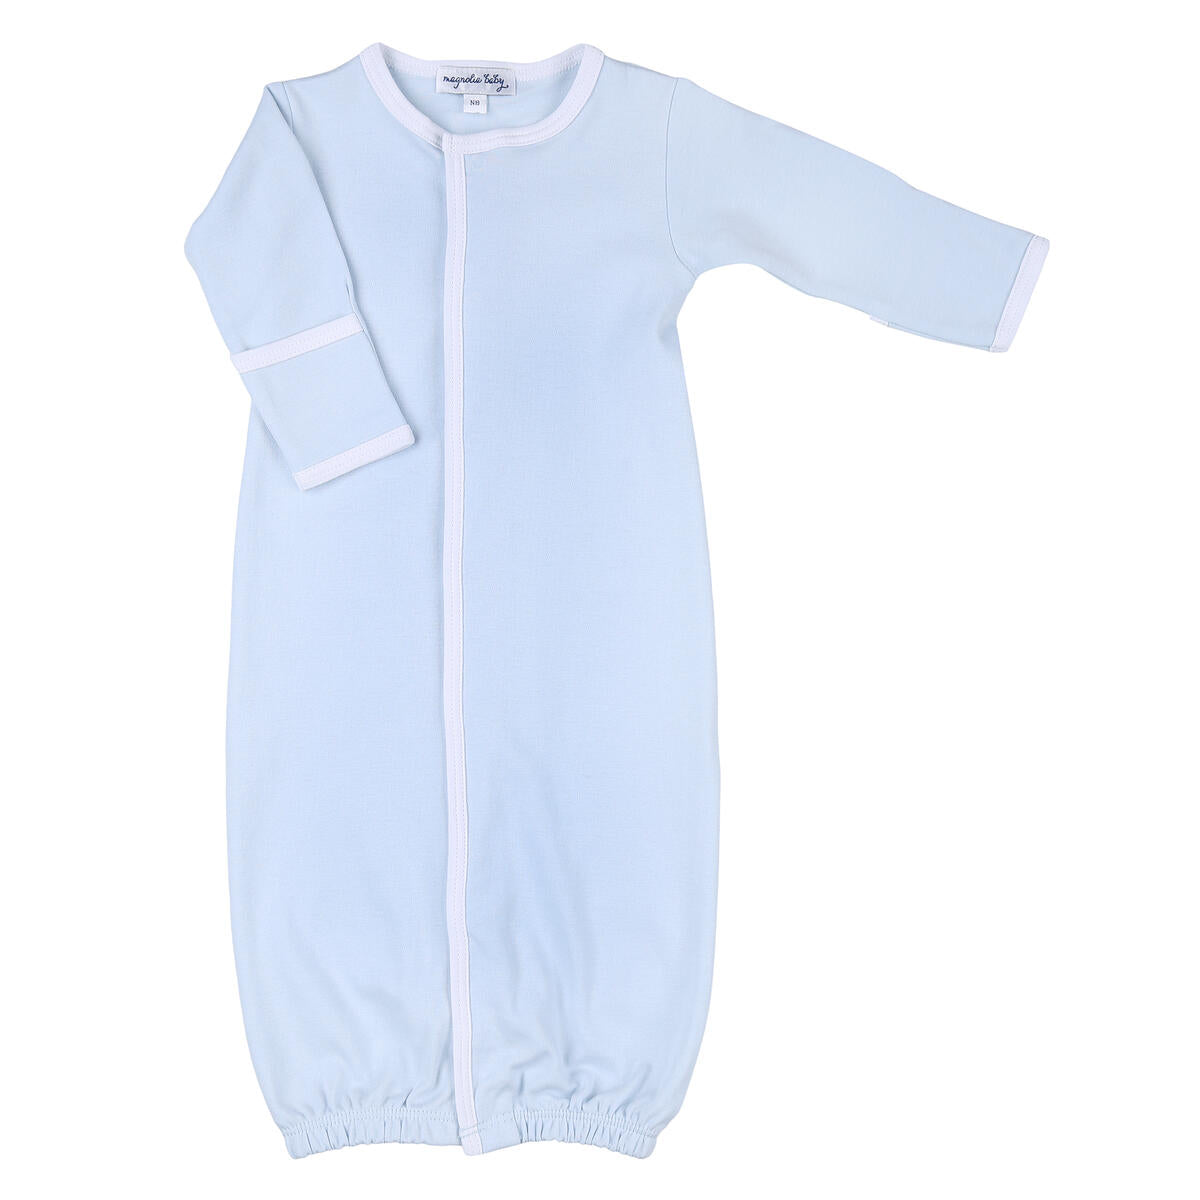 Simply Solids Converter Gown Light Blue